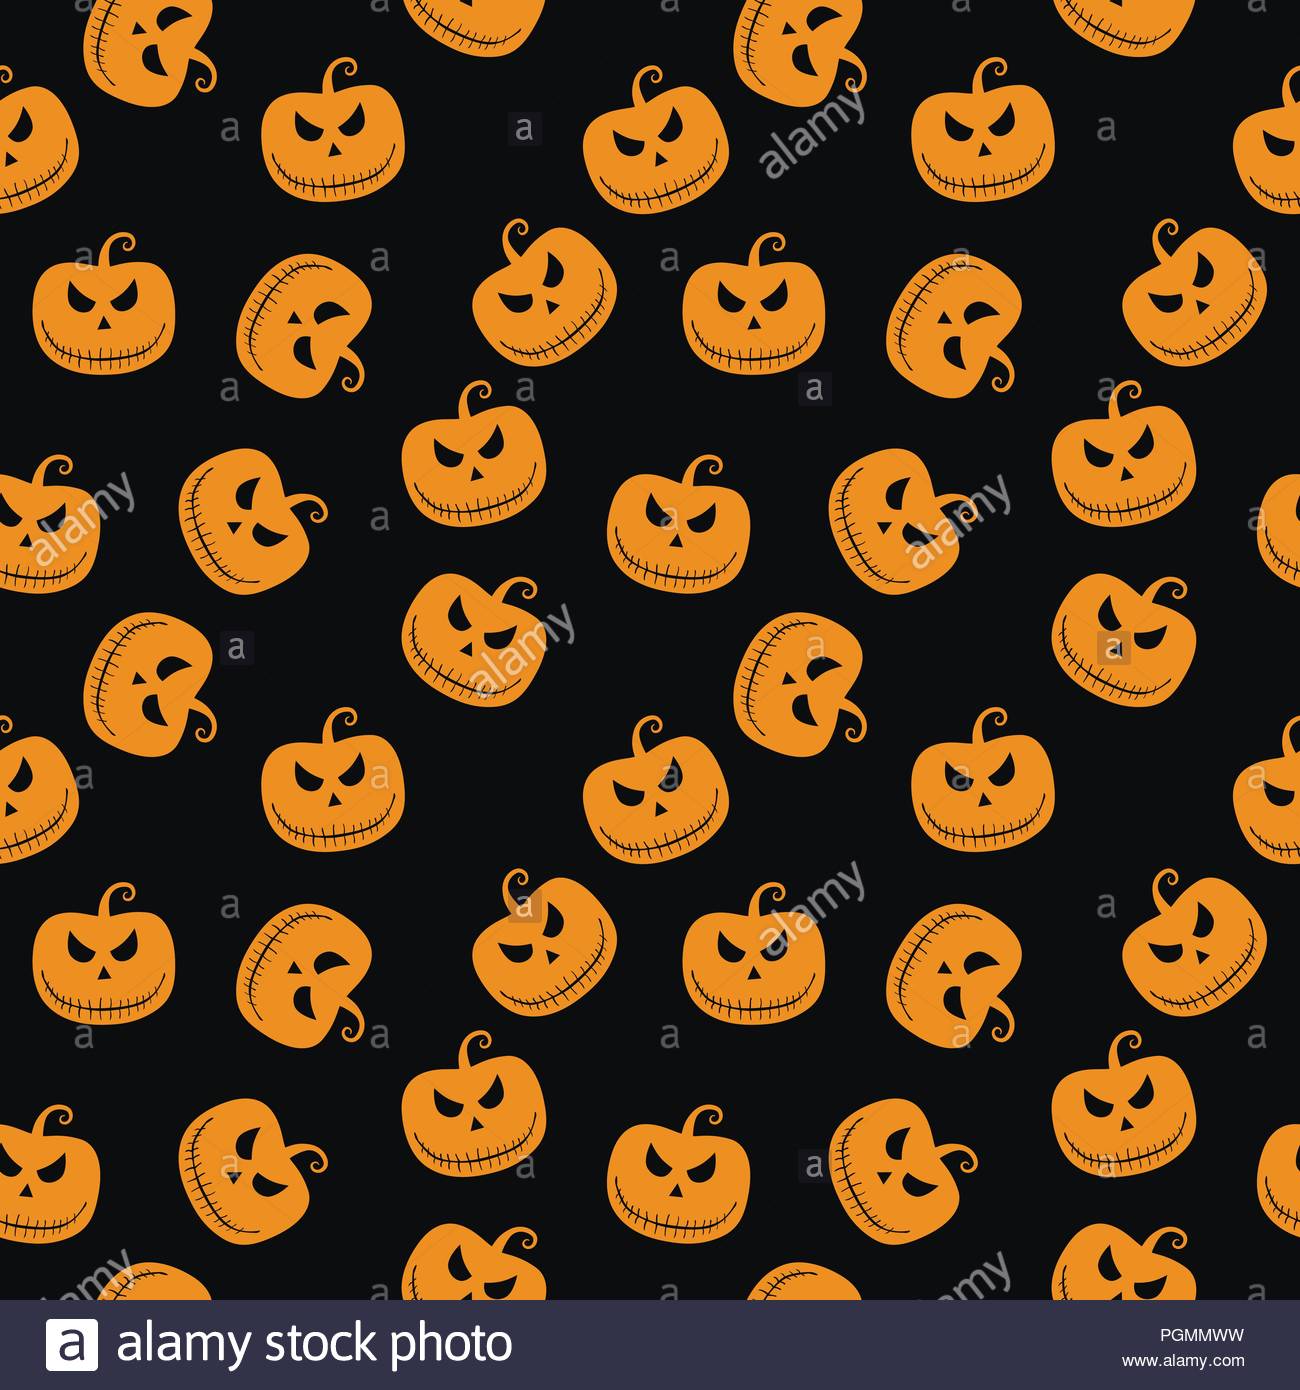 Halloween Seamless Pattern With Scary Stare Pumpkin On Black